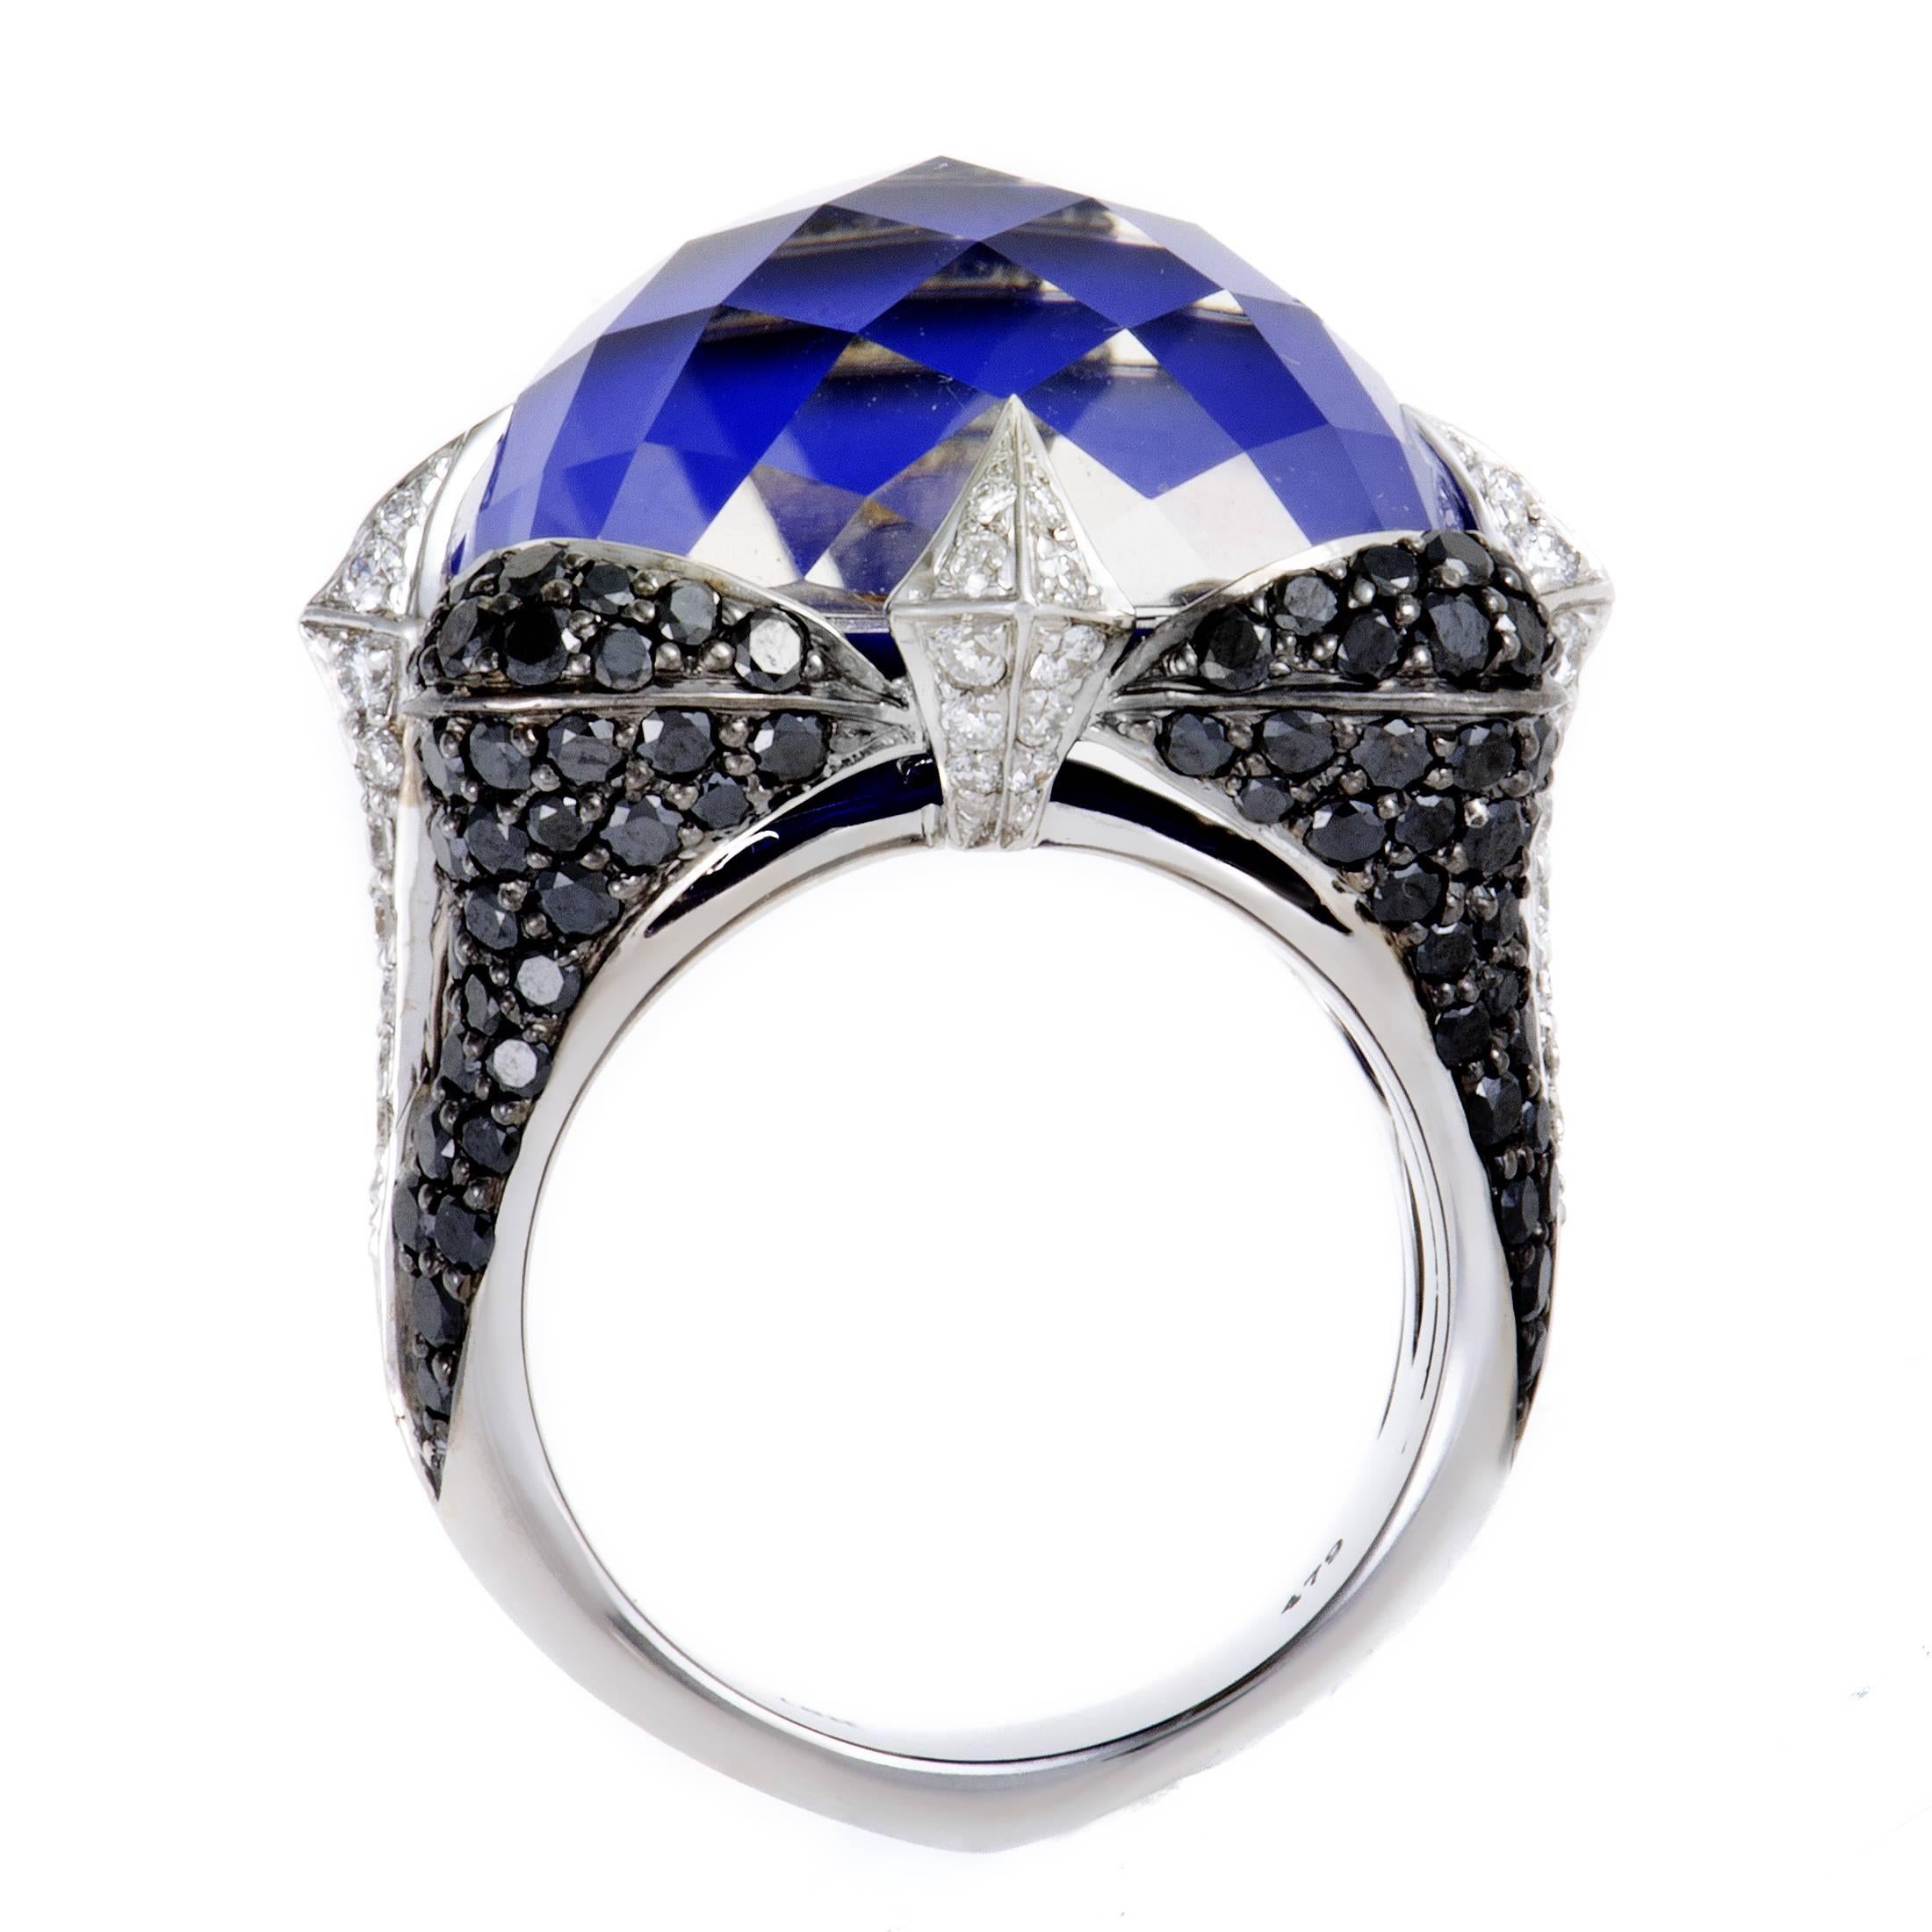 The superb design qualities of Stephen Webster’s sublime “Crystal Haze” collection are embodied in this spectacular ring made of exemplary 18K white gold and set with 2.97 carats of captivating diamonds, also featuring a splendid lapis lazuli stone